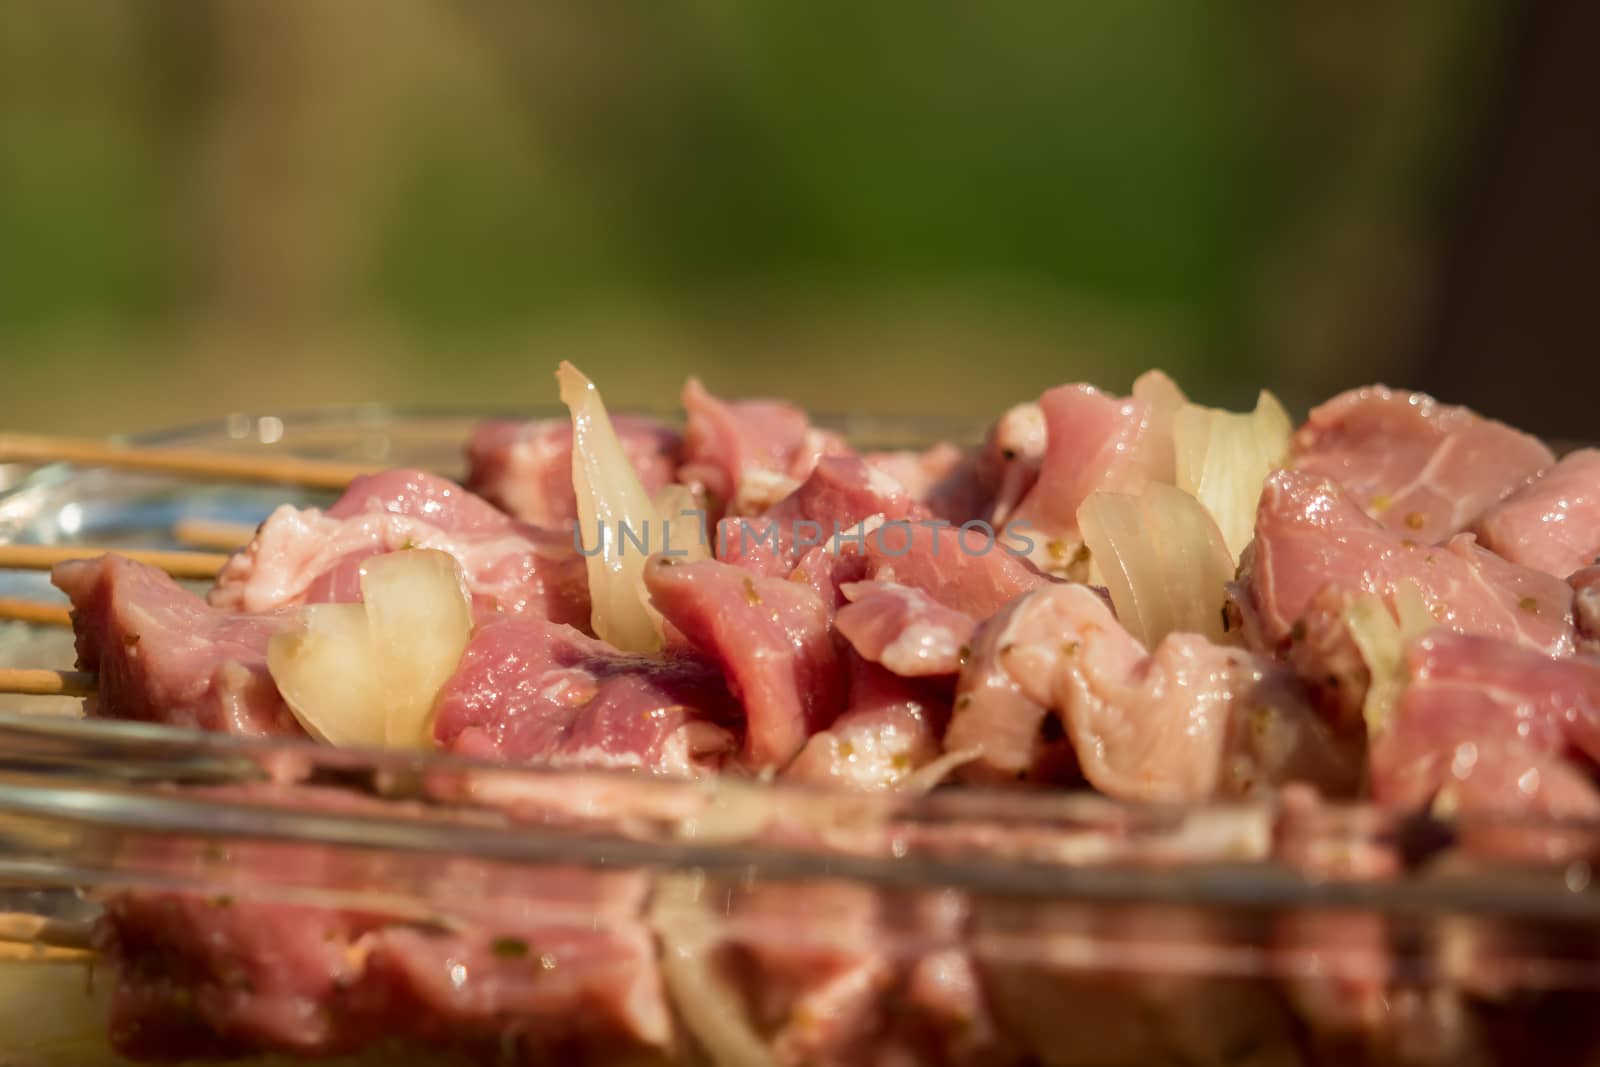 Raw meat skewers marinated before grilling by sandra_fotodesign